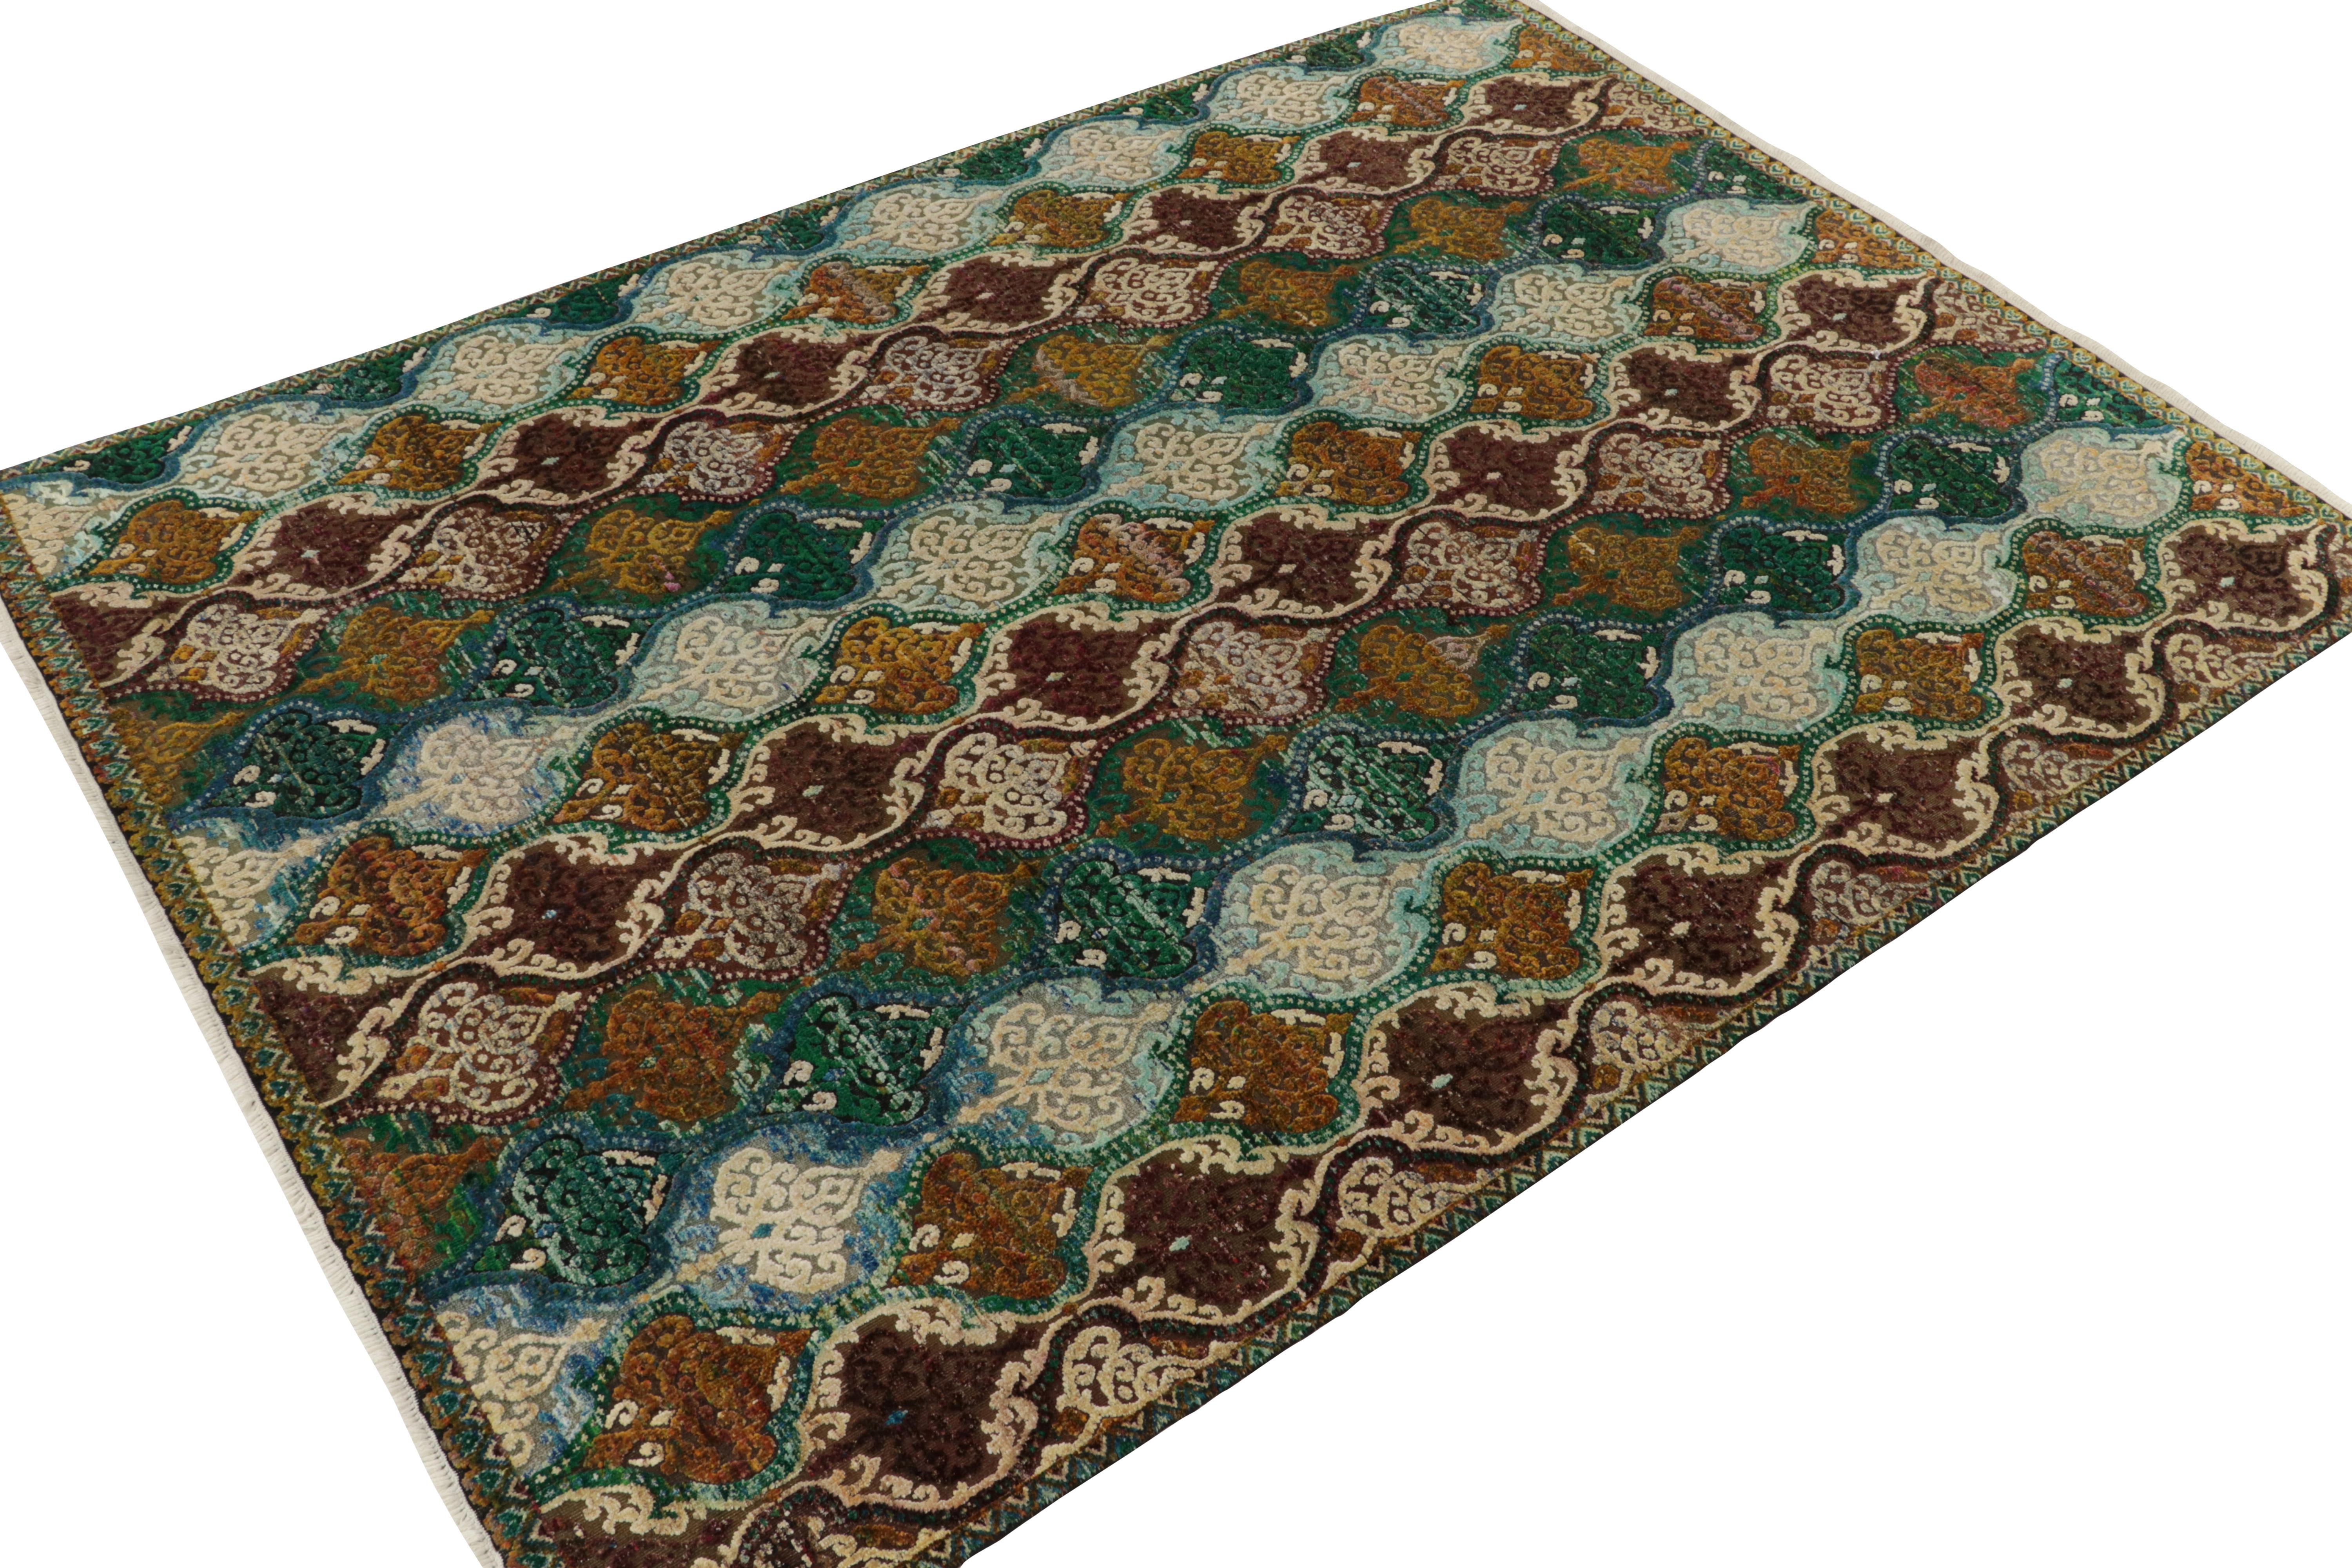 Hand-knotted in wool & silk, this 9x12 contemporary rug from our Modern Classics collection marks an inventive take on antique Indian rug sensibilities. 

A gracious scale hosts a series of floral crest patterns in rich gold, forest green, rich